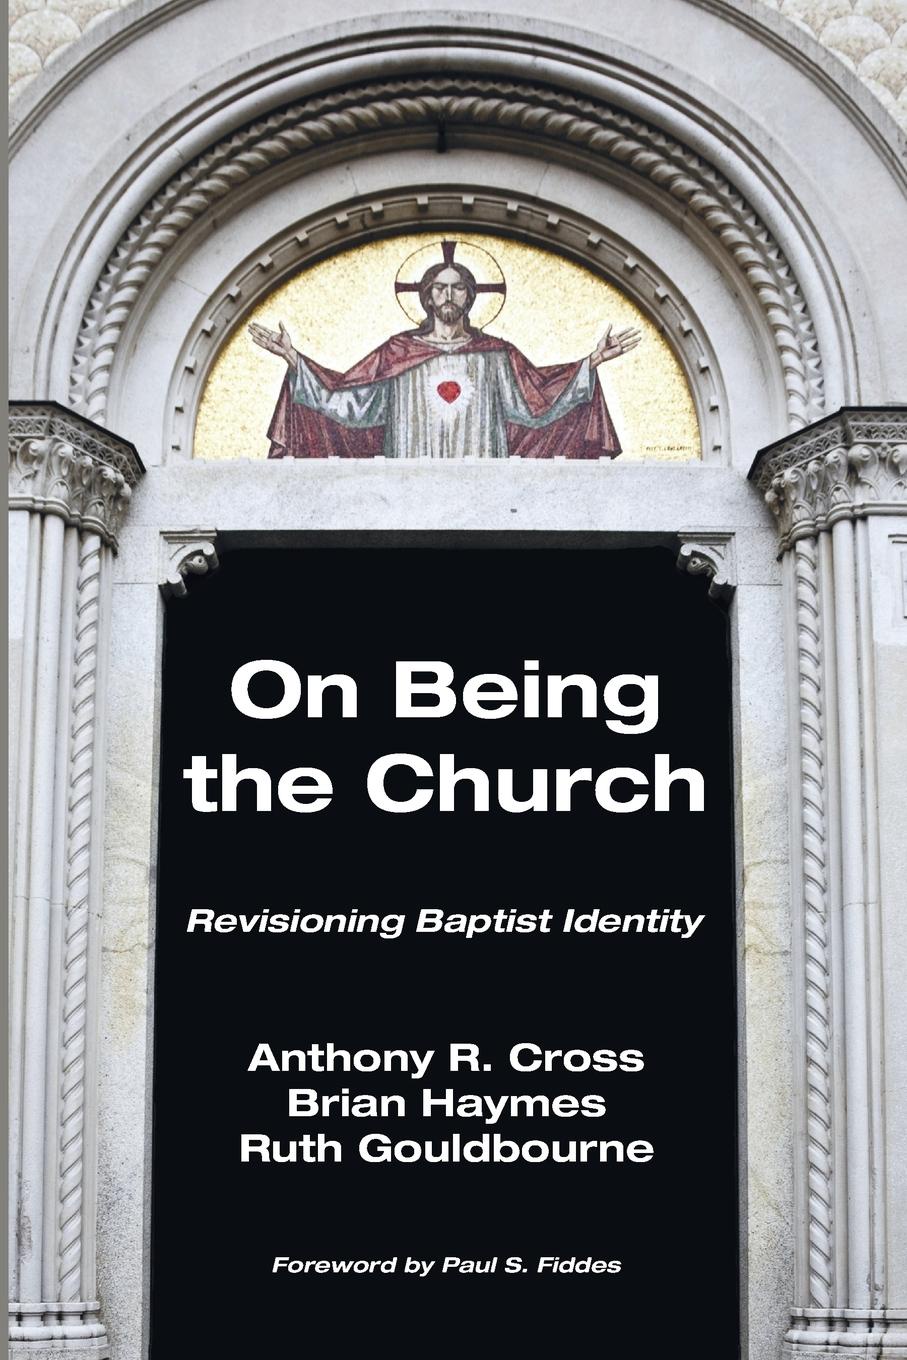 On Being the Church. Revisioning Baptist Identity